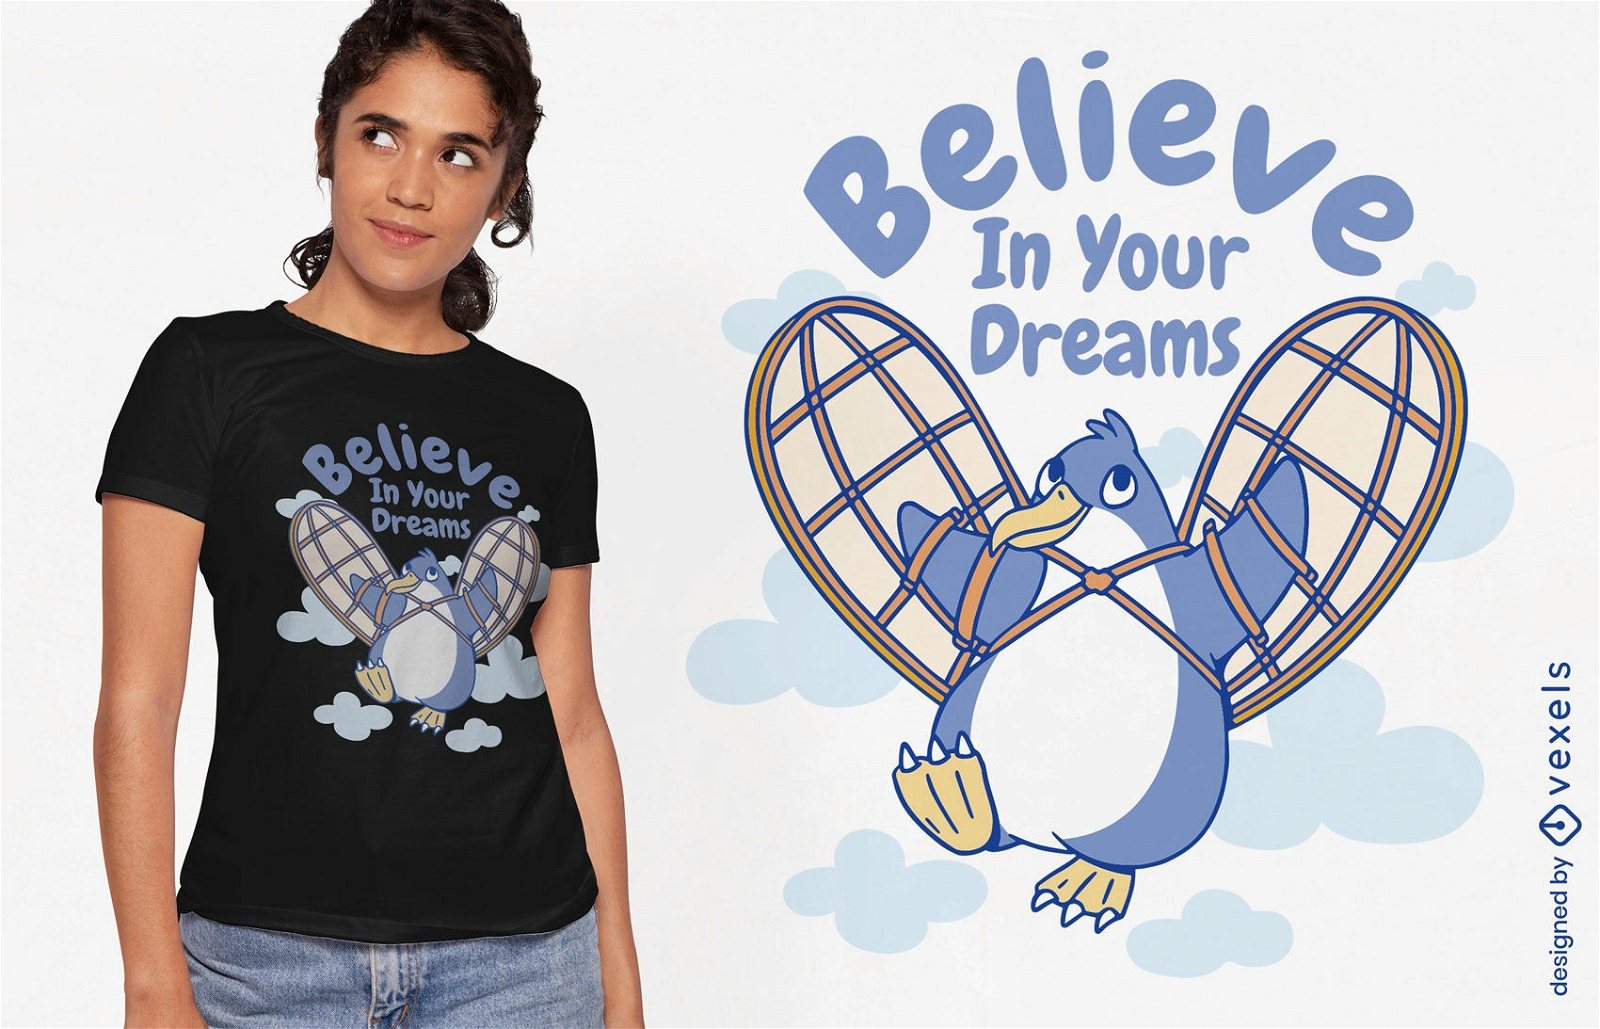 Believe in your dreams funny penguin t-shirt design